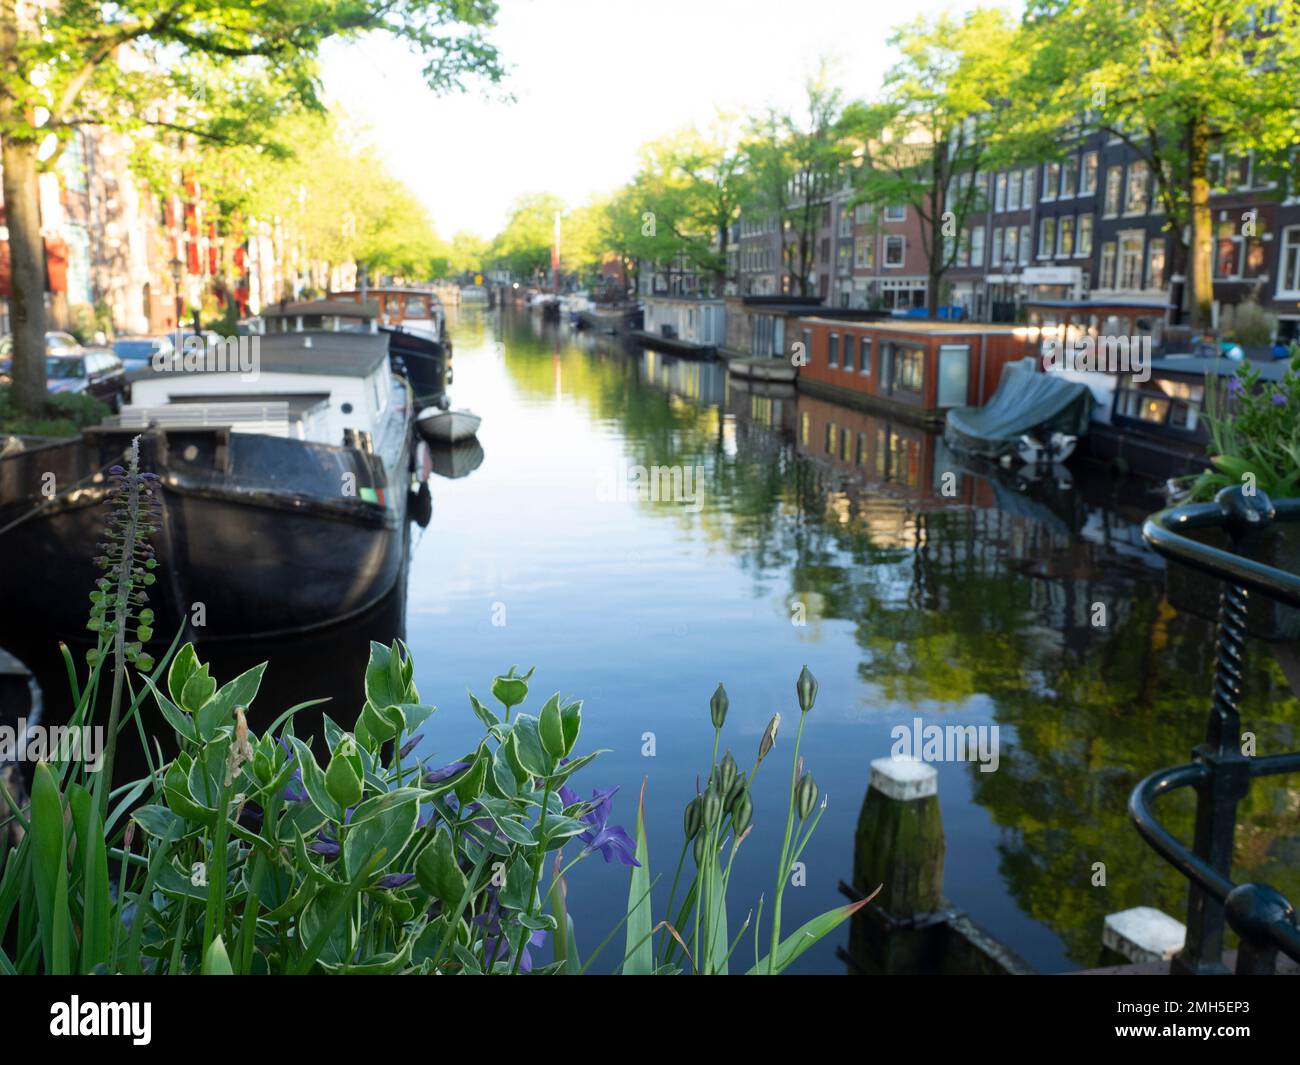 AMSTERDAM, NETHERLANDS - MAY 01, 2018:  View along across the Brouwersgracht canal with a defocused view of boats on the canal Stock Photo